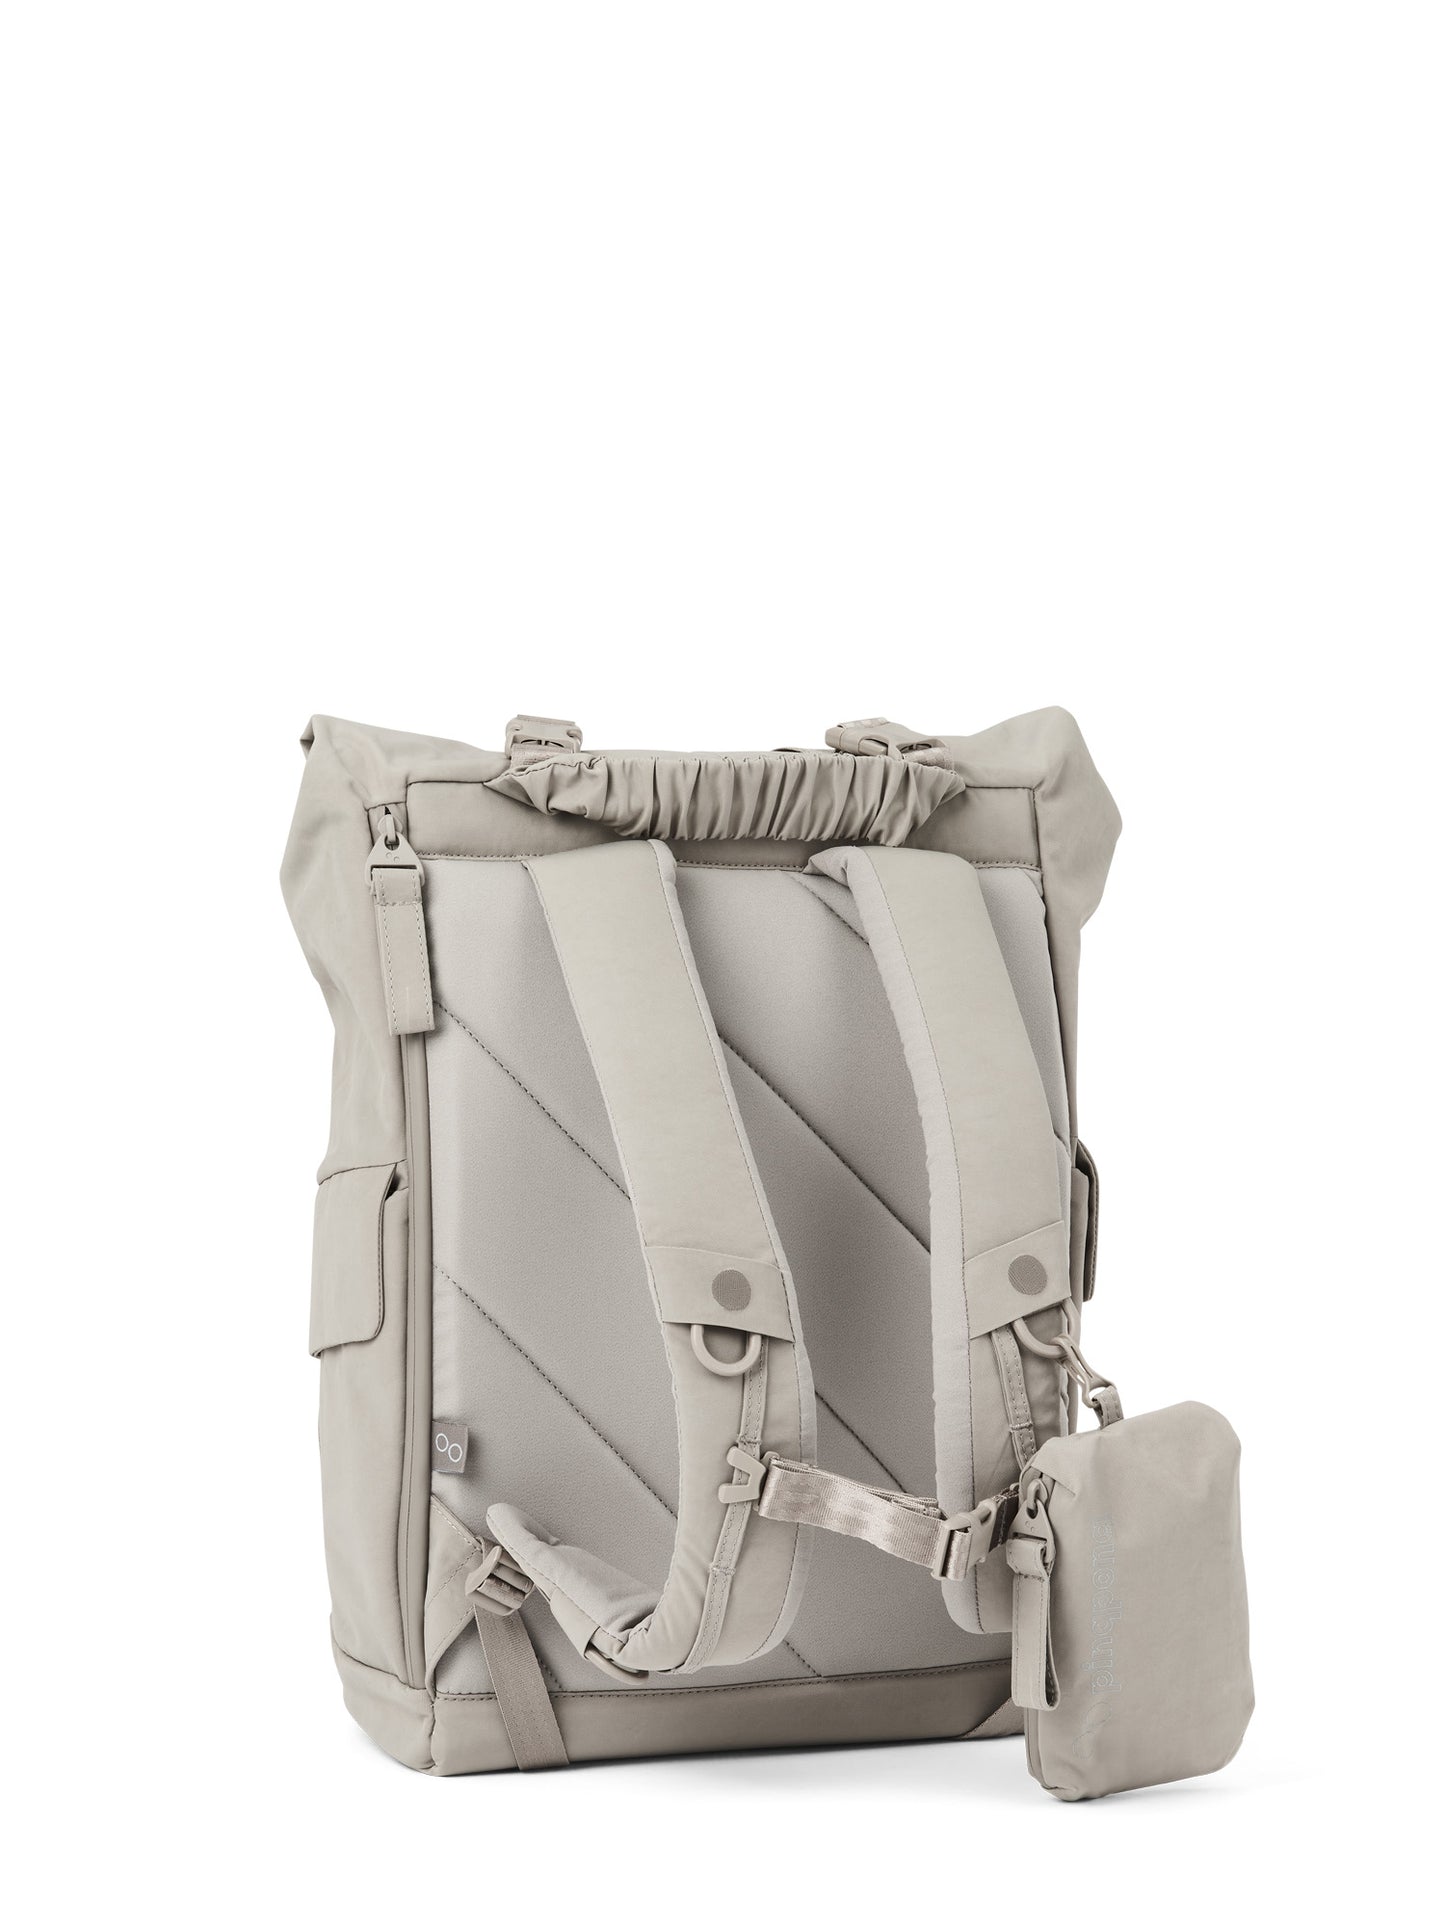 pinqponq-backpack-Kross-Crinkle-Taupe-back